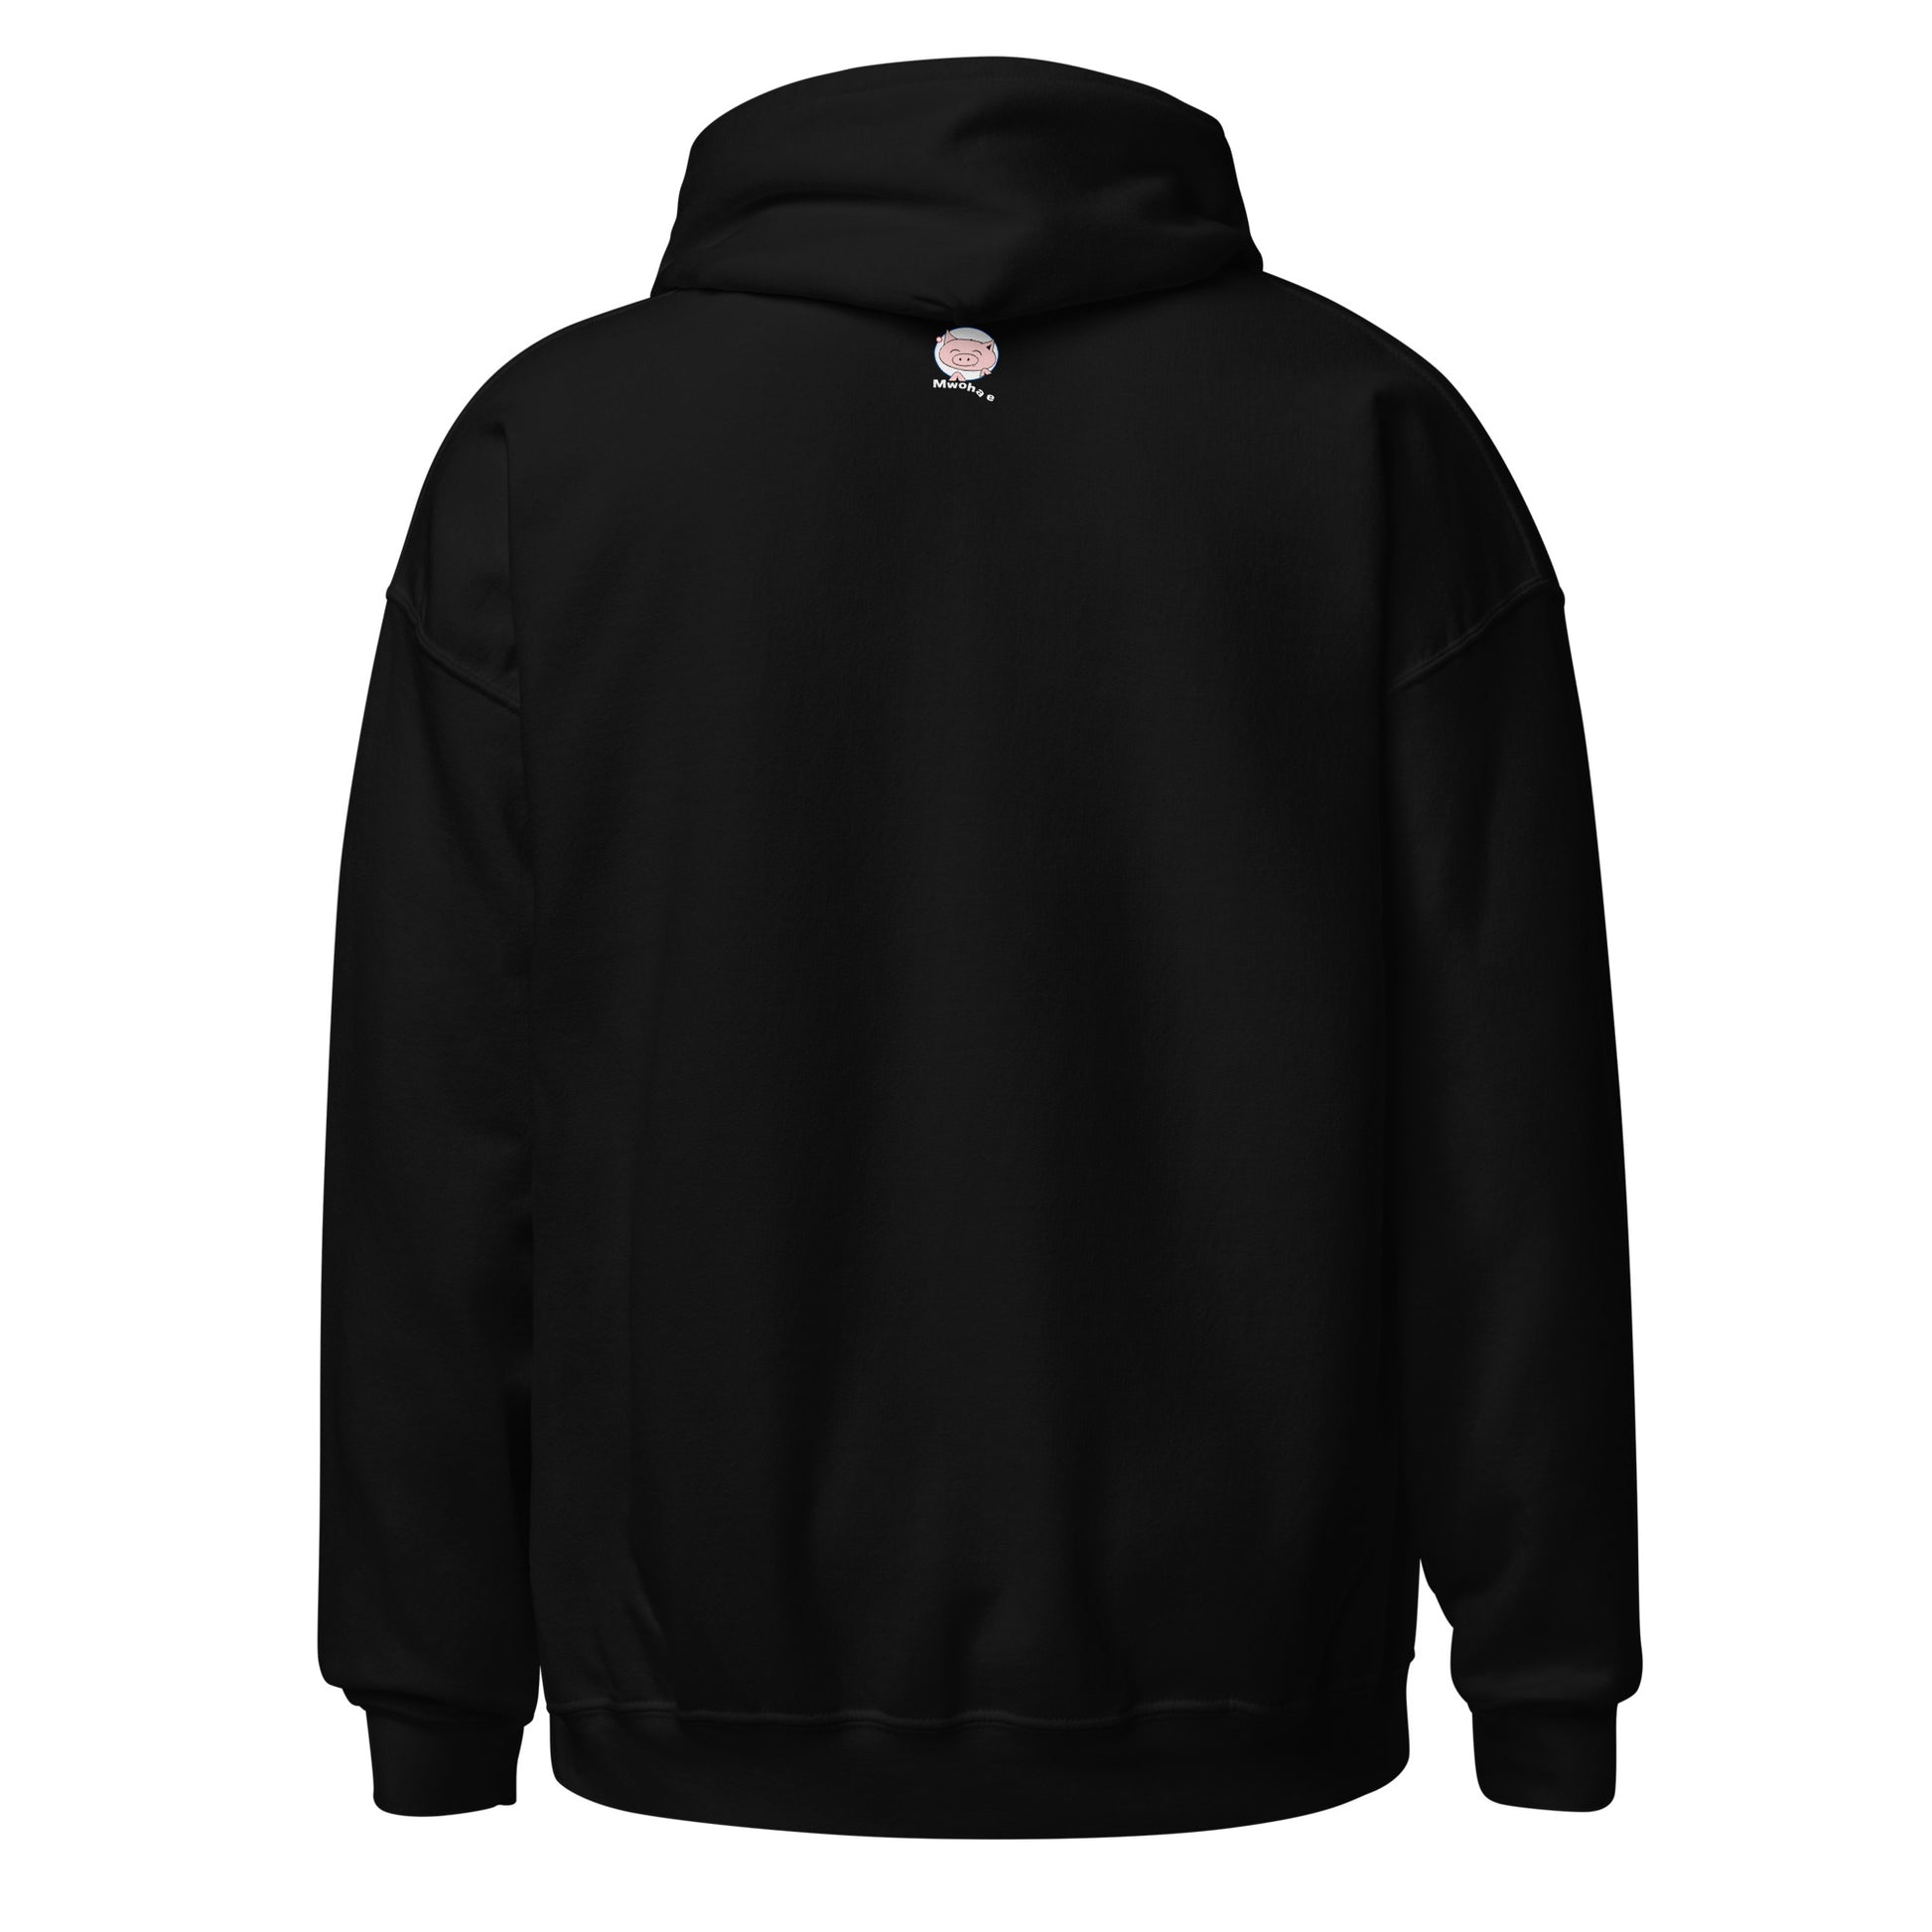 Black hoodie with a small Mwohae logo on the back